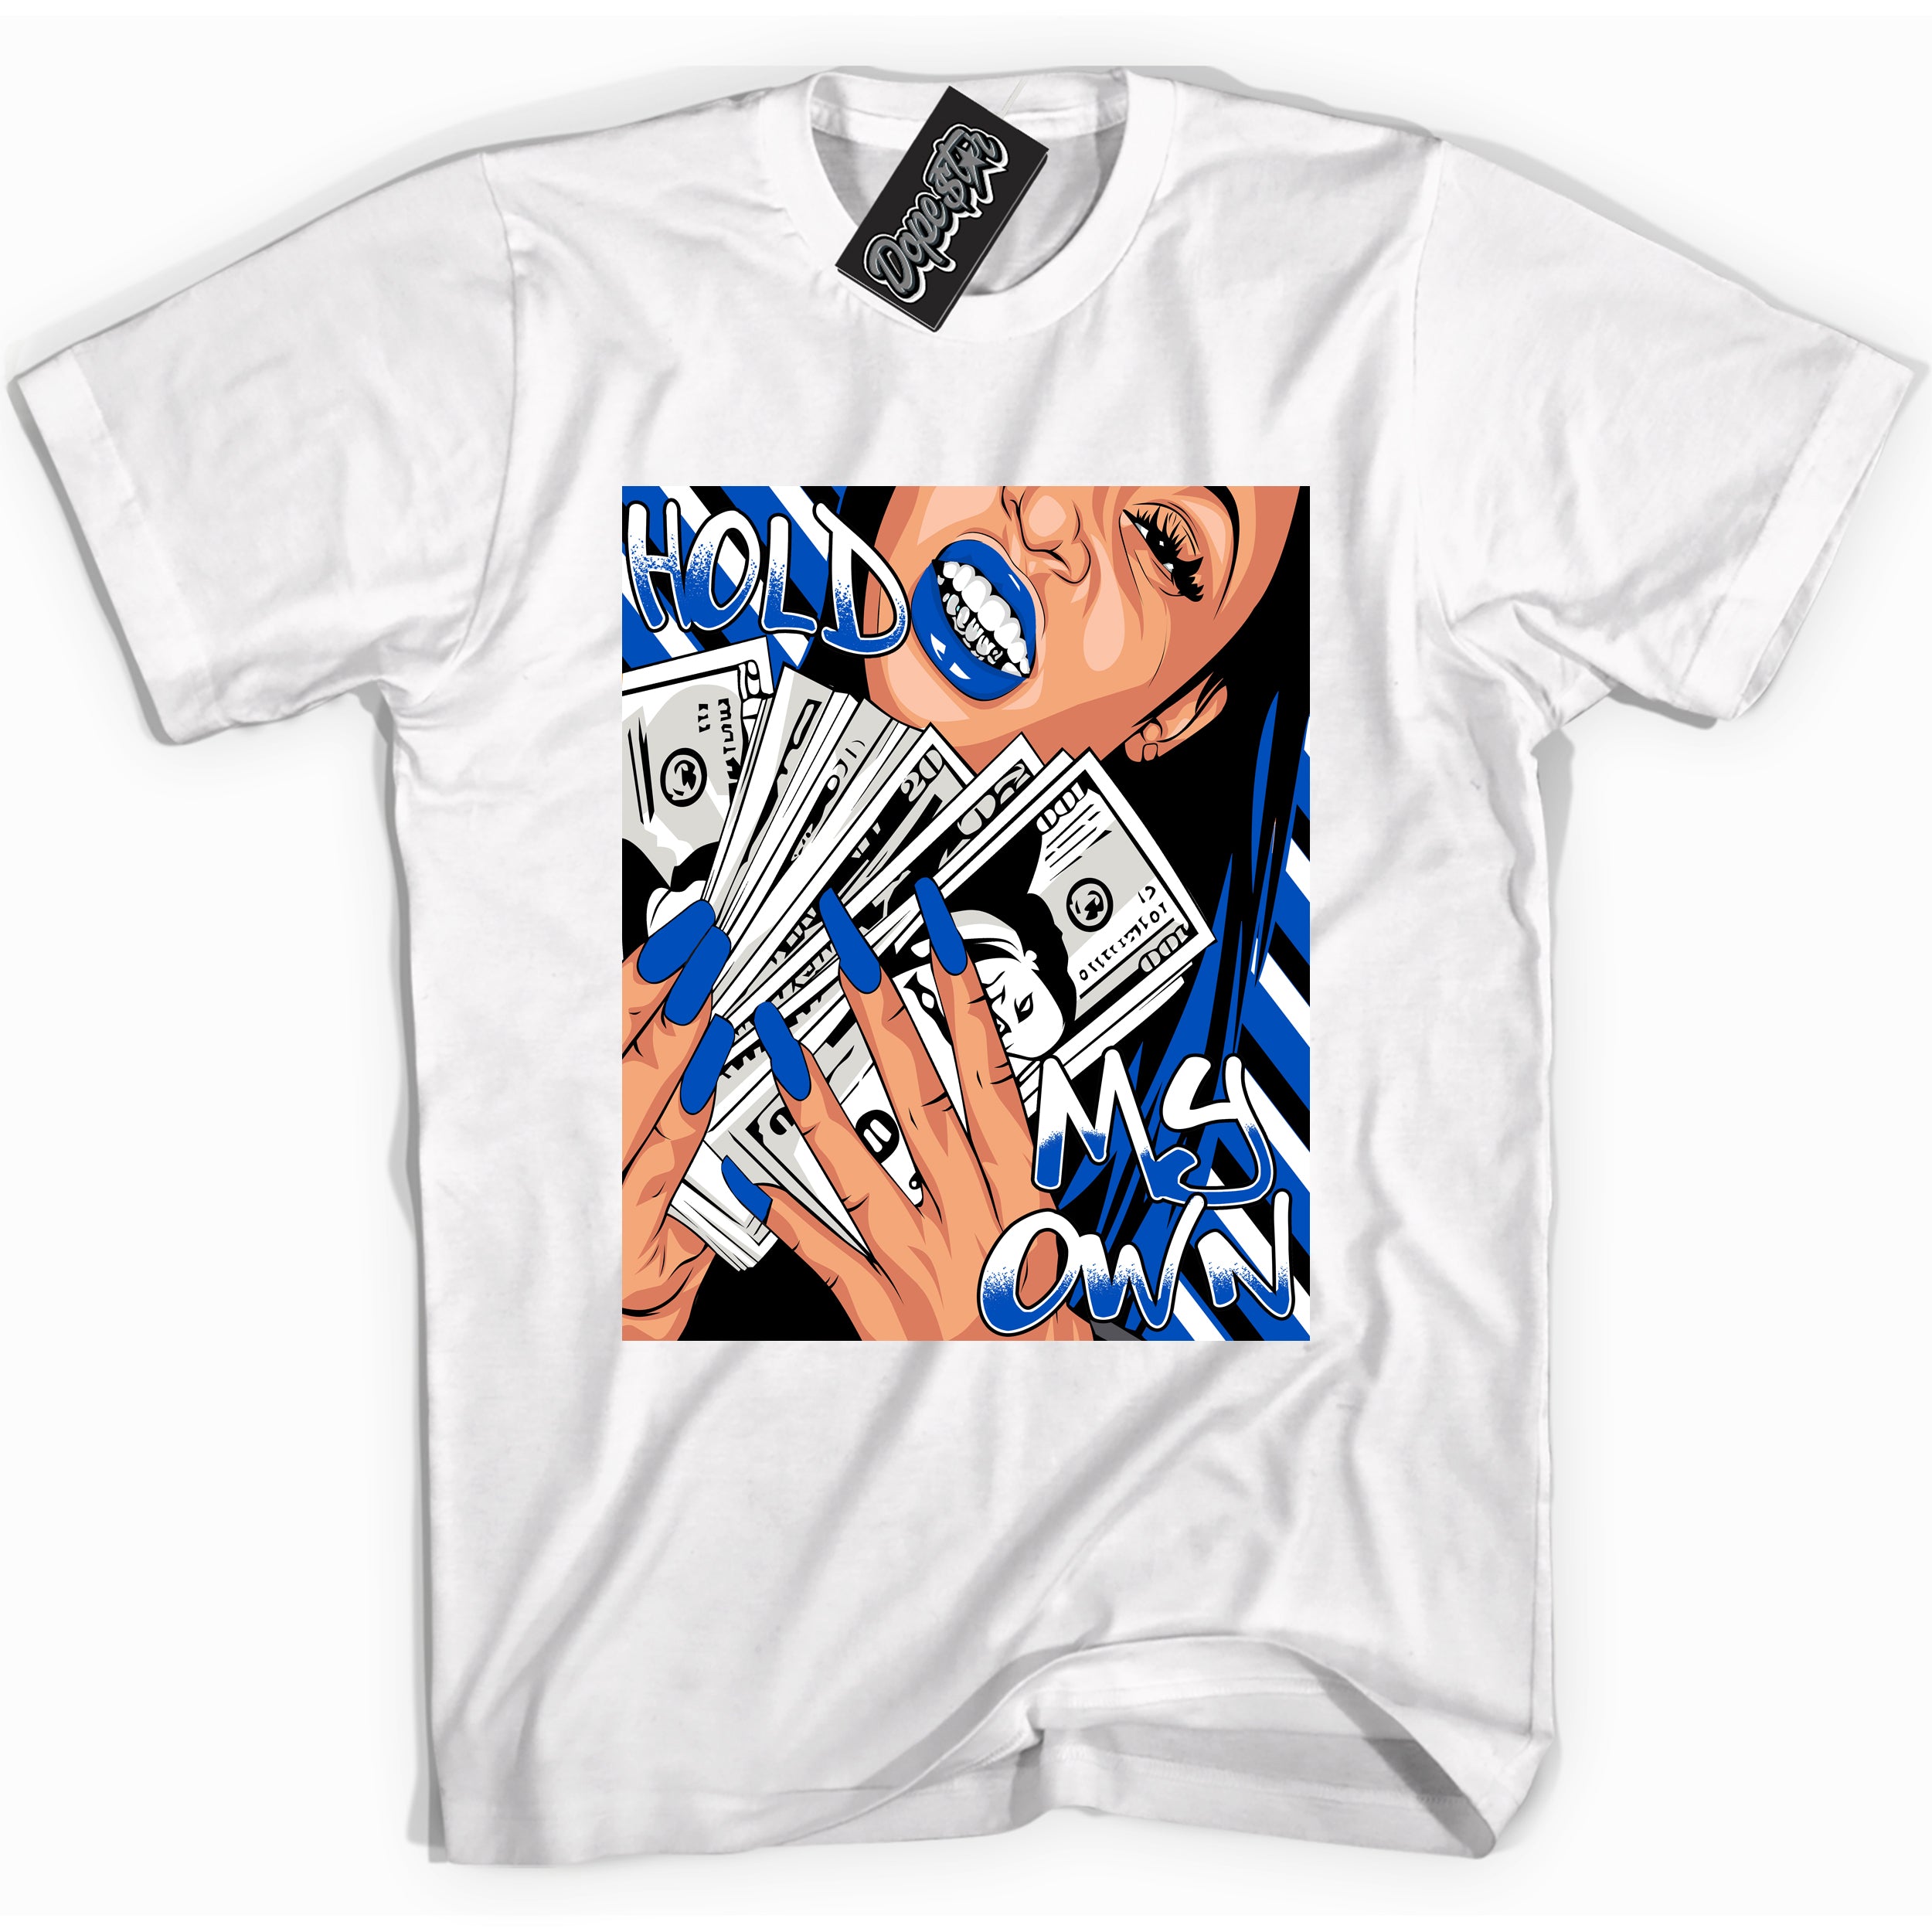 Cool White graphic tee with "Hold My Own" design, that perfectly matches Royal Reimagined 1s sneakers 